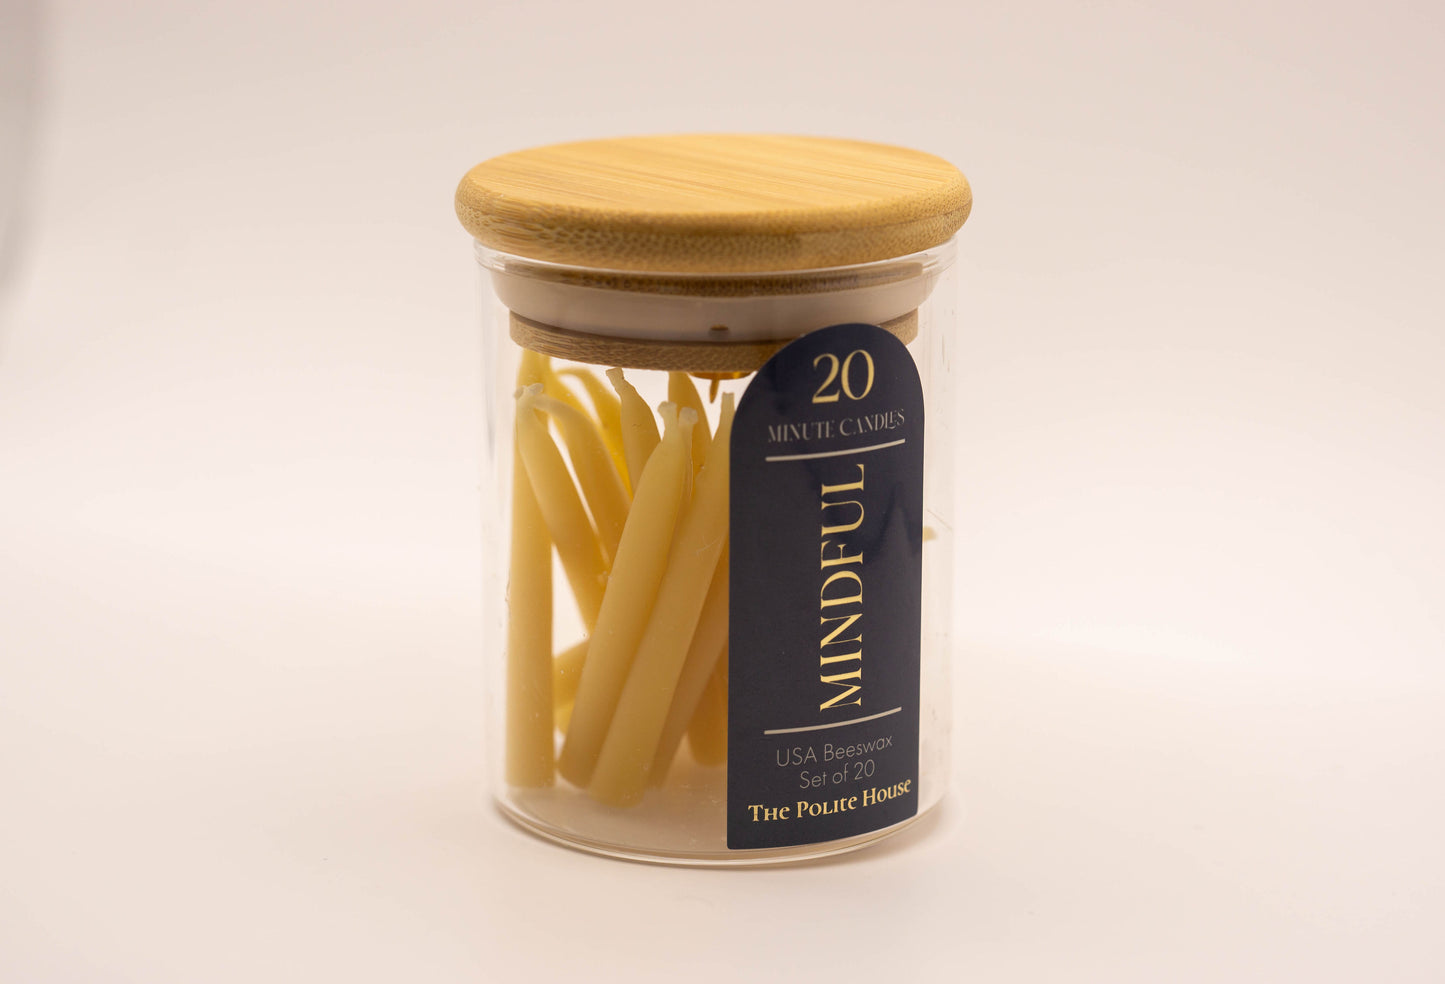 20-Minute Beeswax Candles - MINDFUL - Set of 20 Candles in Jar